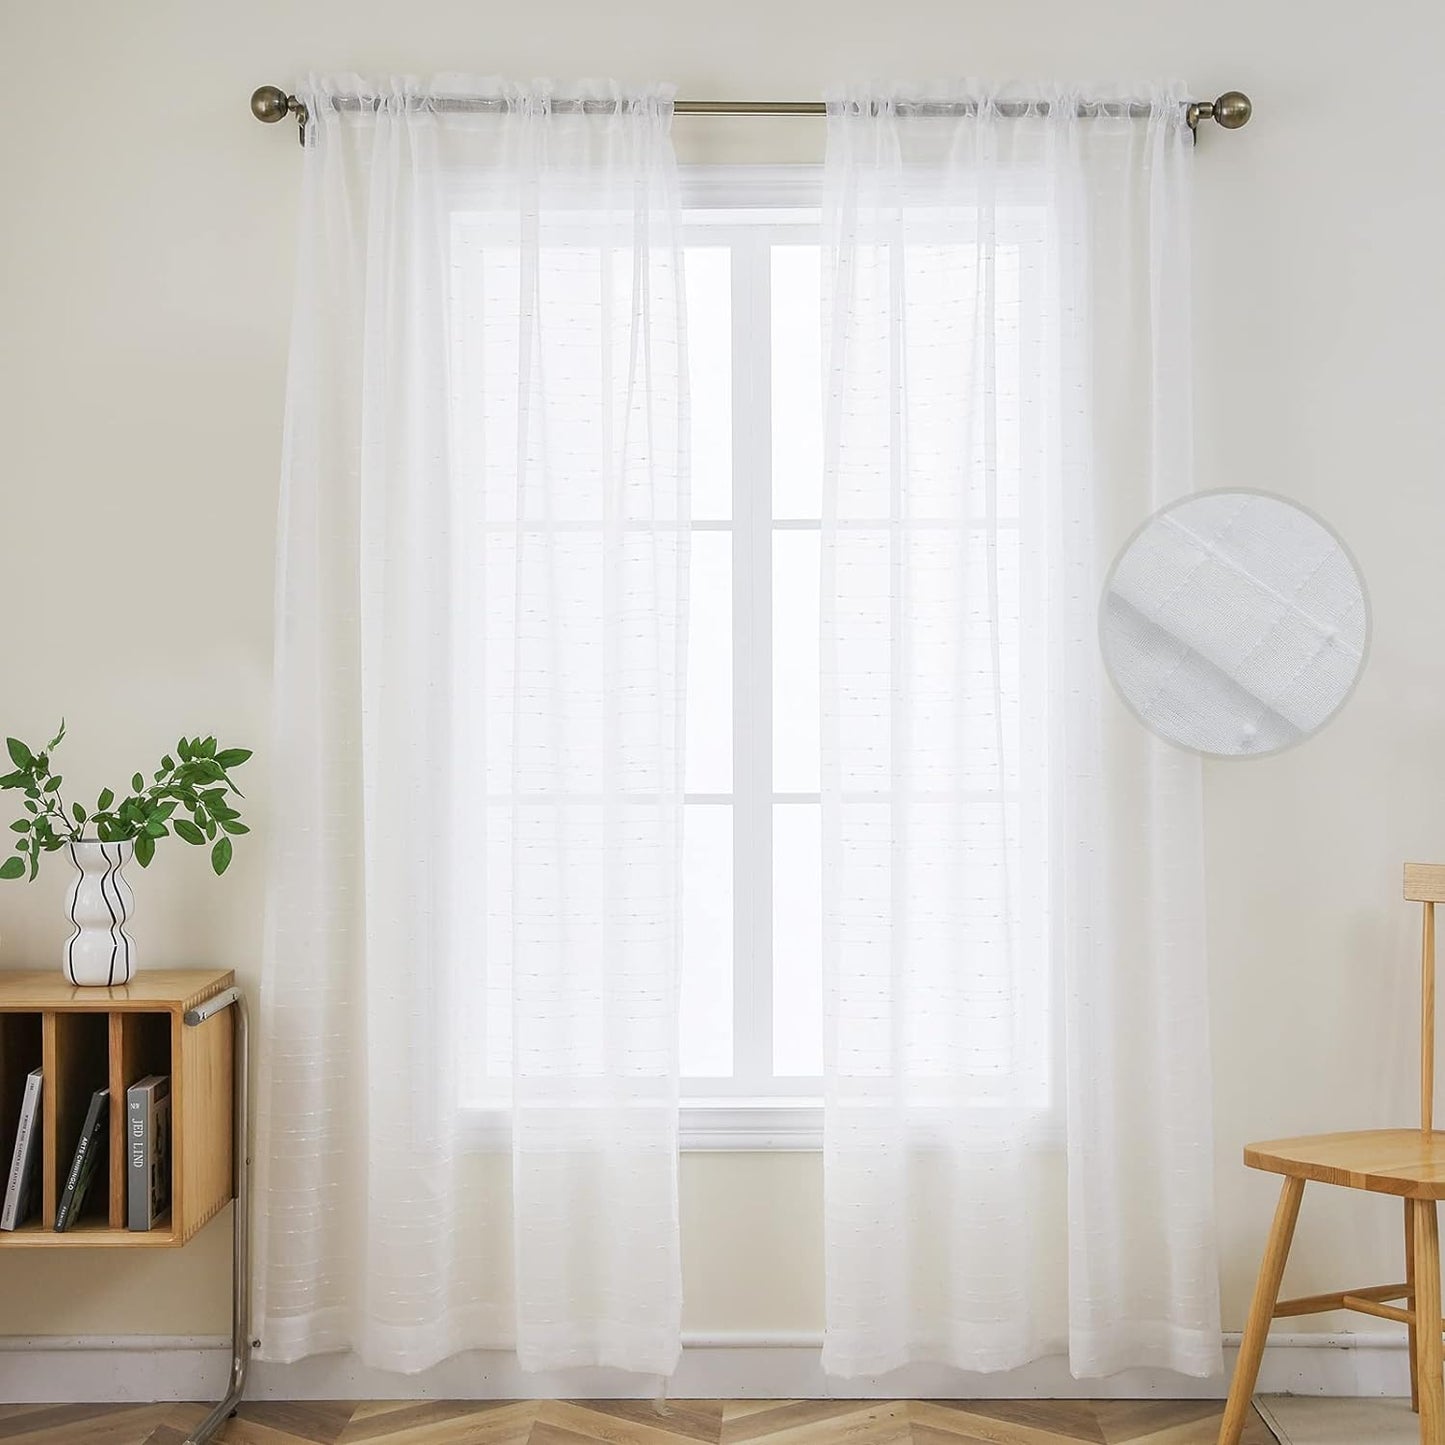 Joydeco White Sheer Curtains 63 Inch Length 2 Panels Set, Rod Pocket Long Sheer Curtains for Window Bedroom Living Room, Lightweight Semi Drape Panels for Yard Patio (54X63 Inch, off White)  Joydeco Solid Color-White 54W X 84L Inch X 2 Panels 